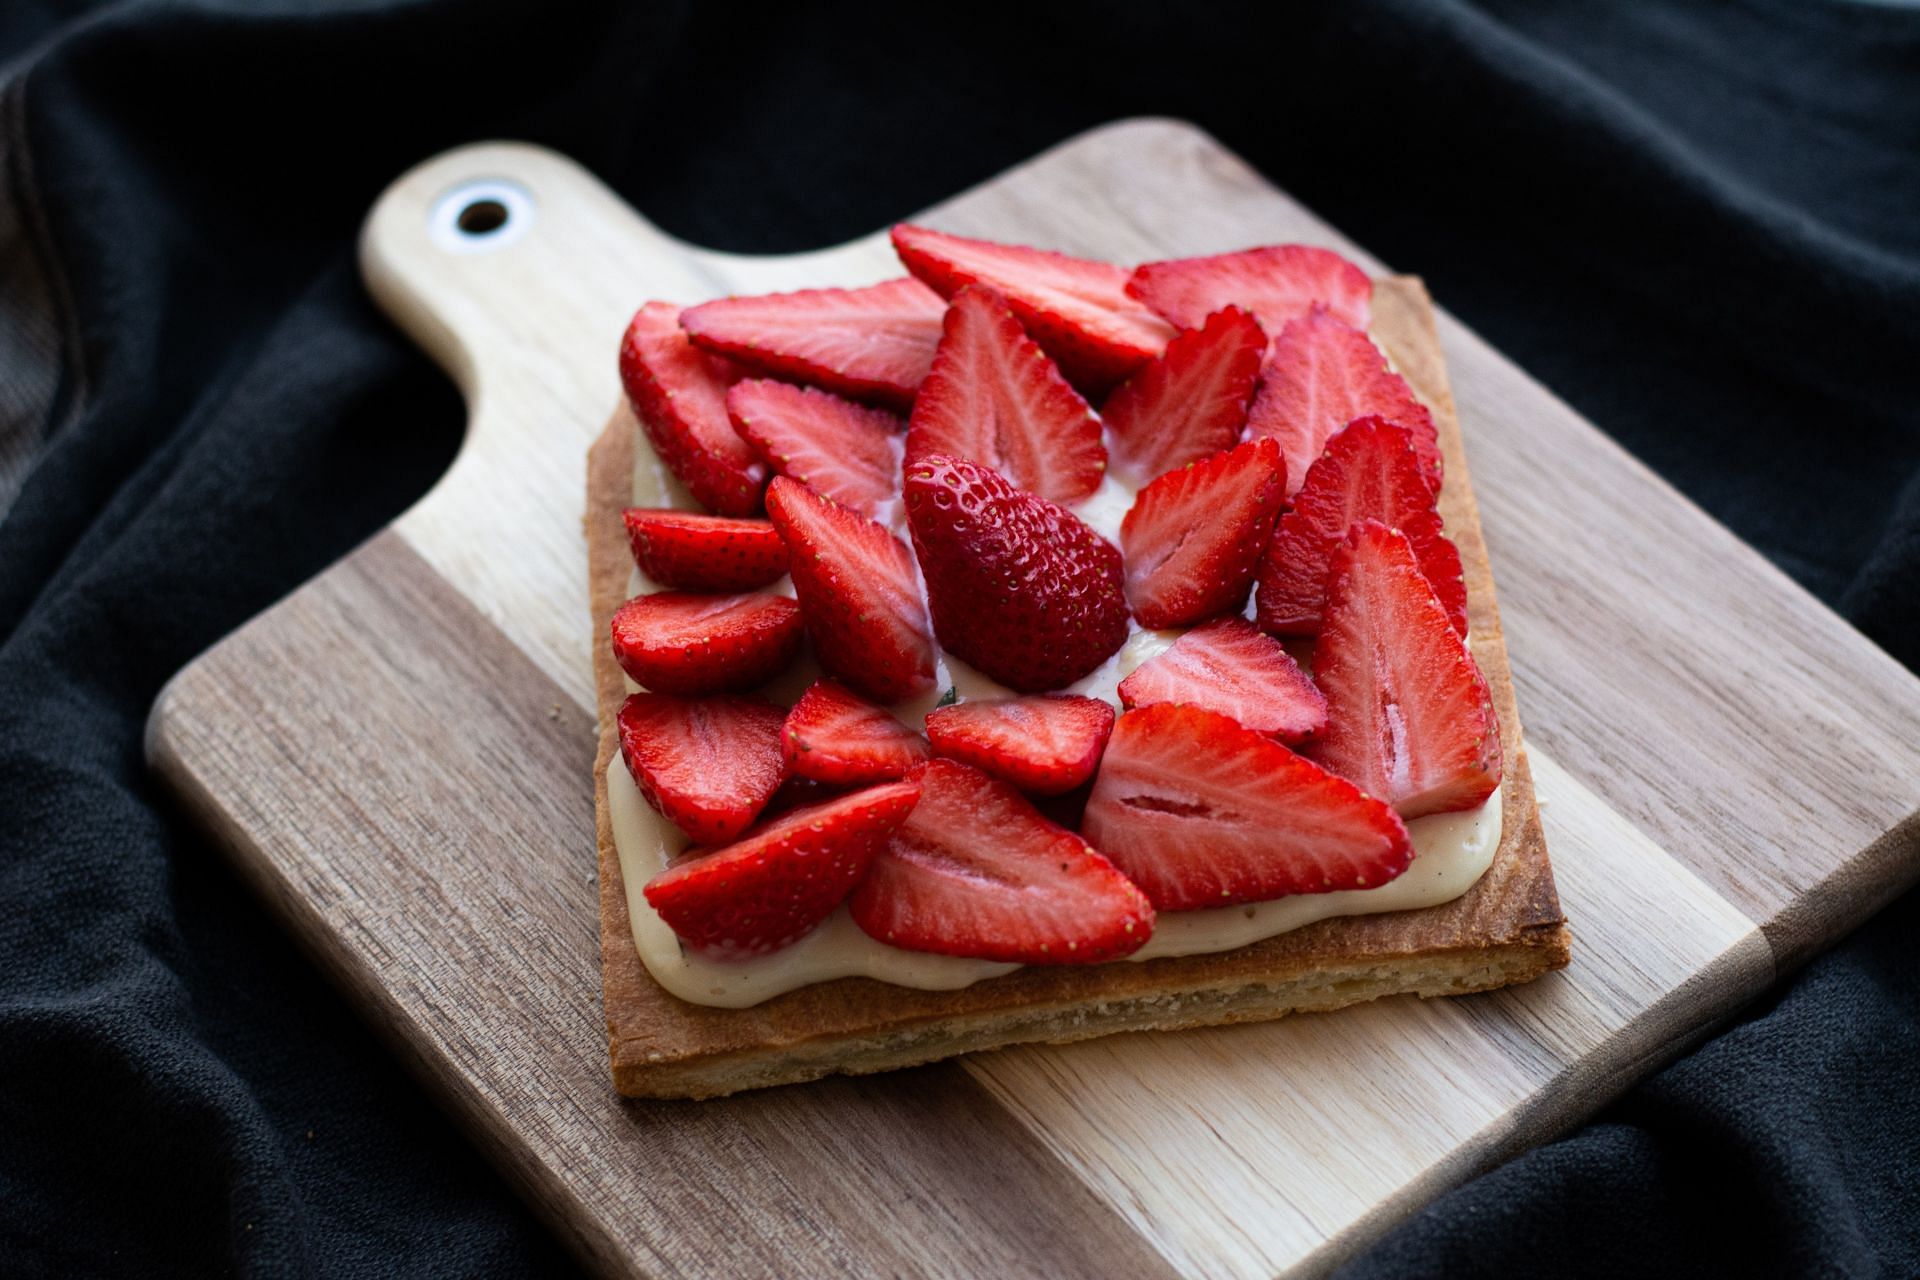 Strawberry as a less sugary foods (image sourced via Pexels / Photo by Pierra antoine)